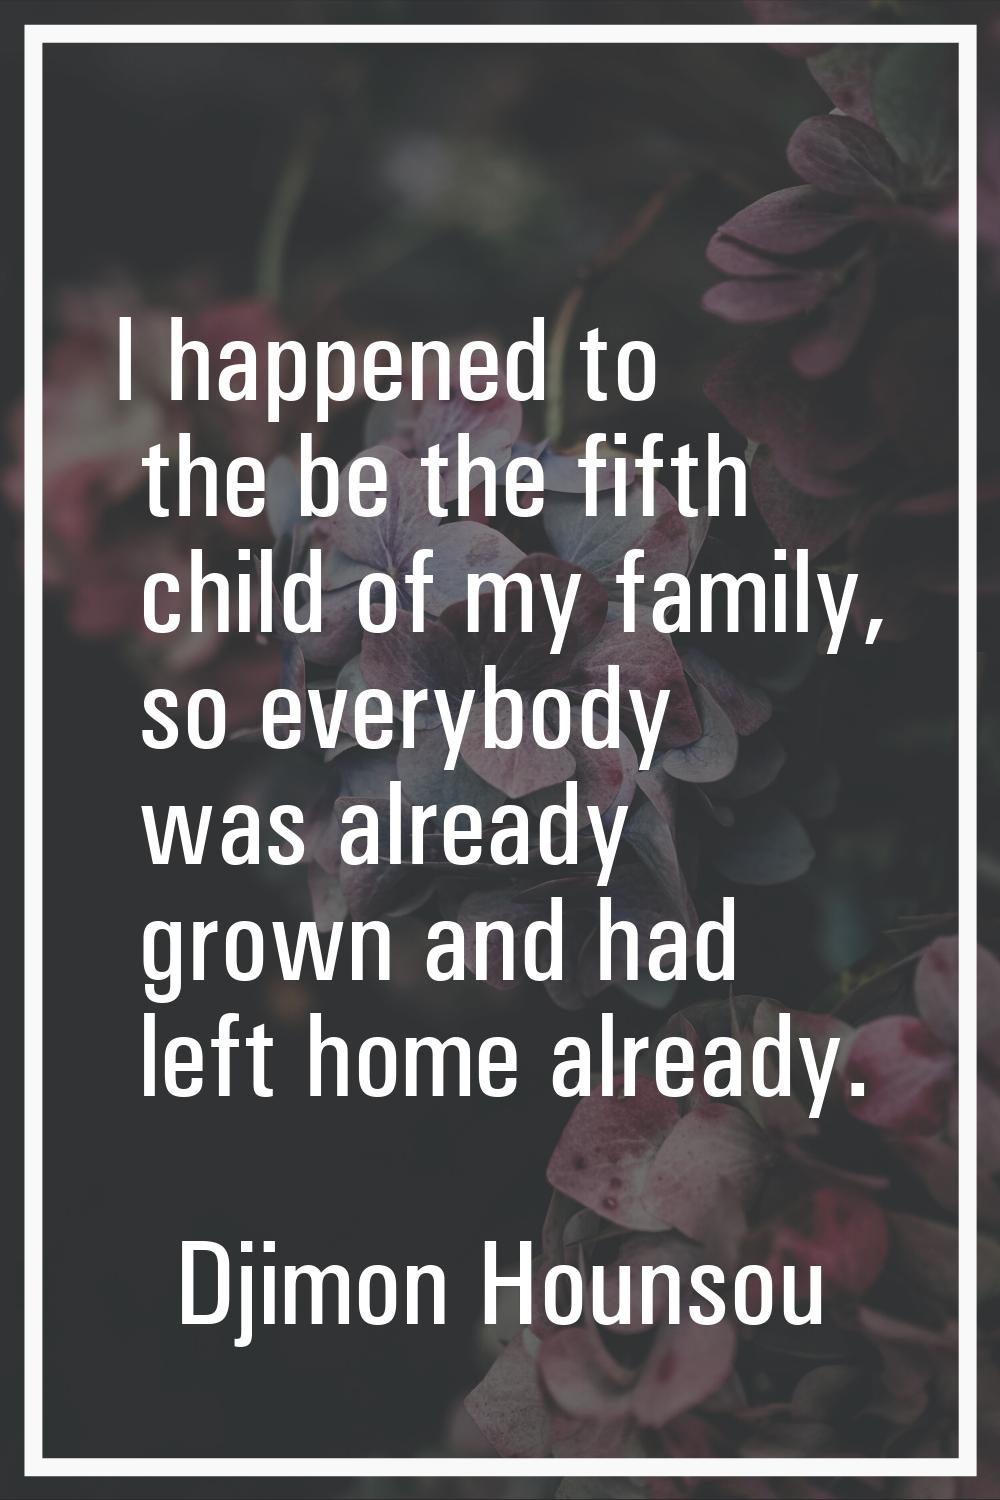 I happened to the be the fifth child of my family, so everybody was already grown and had left home